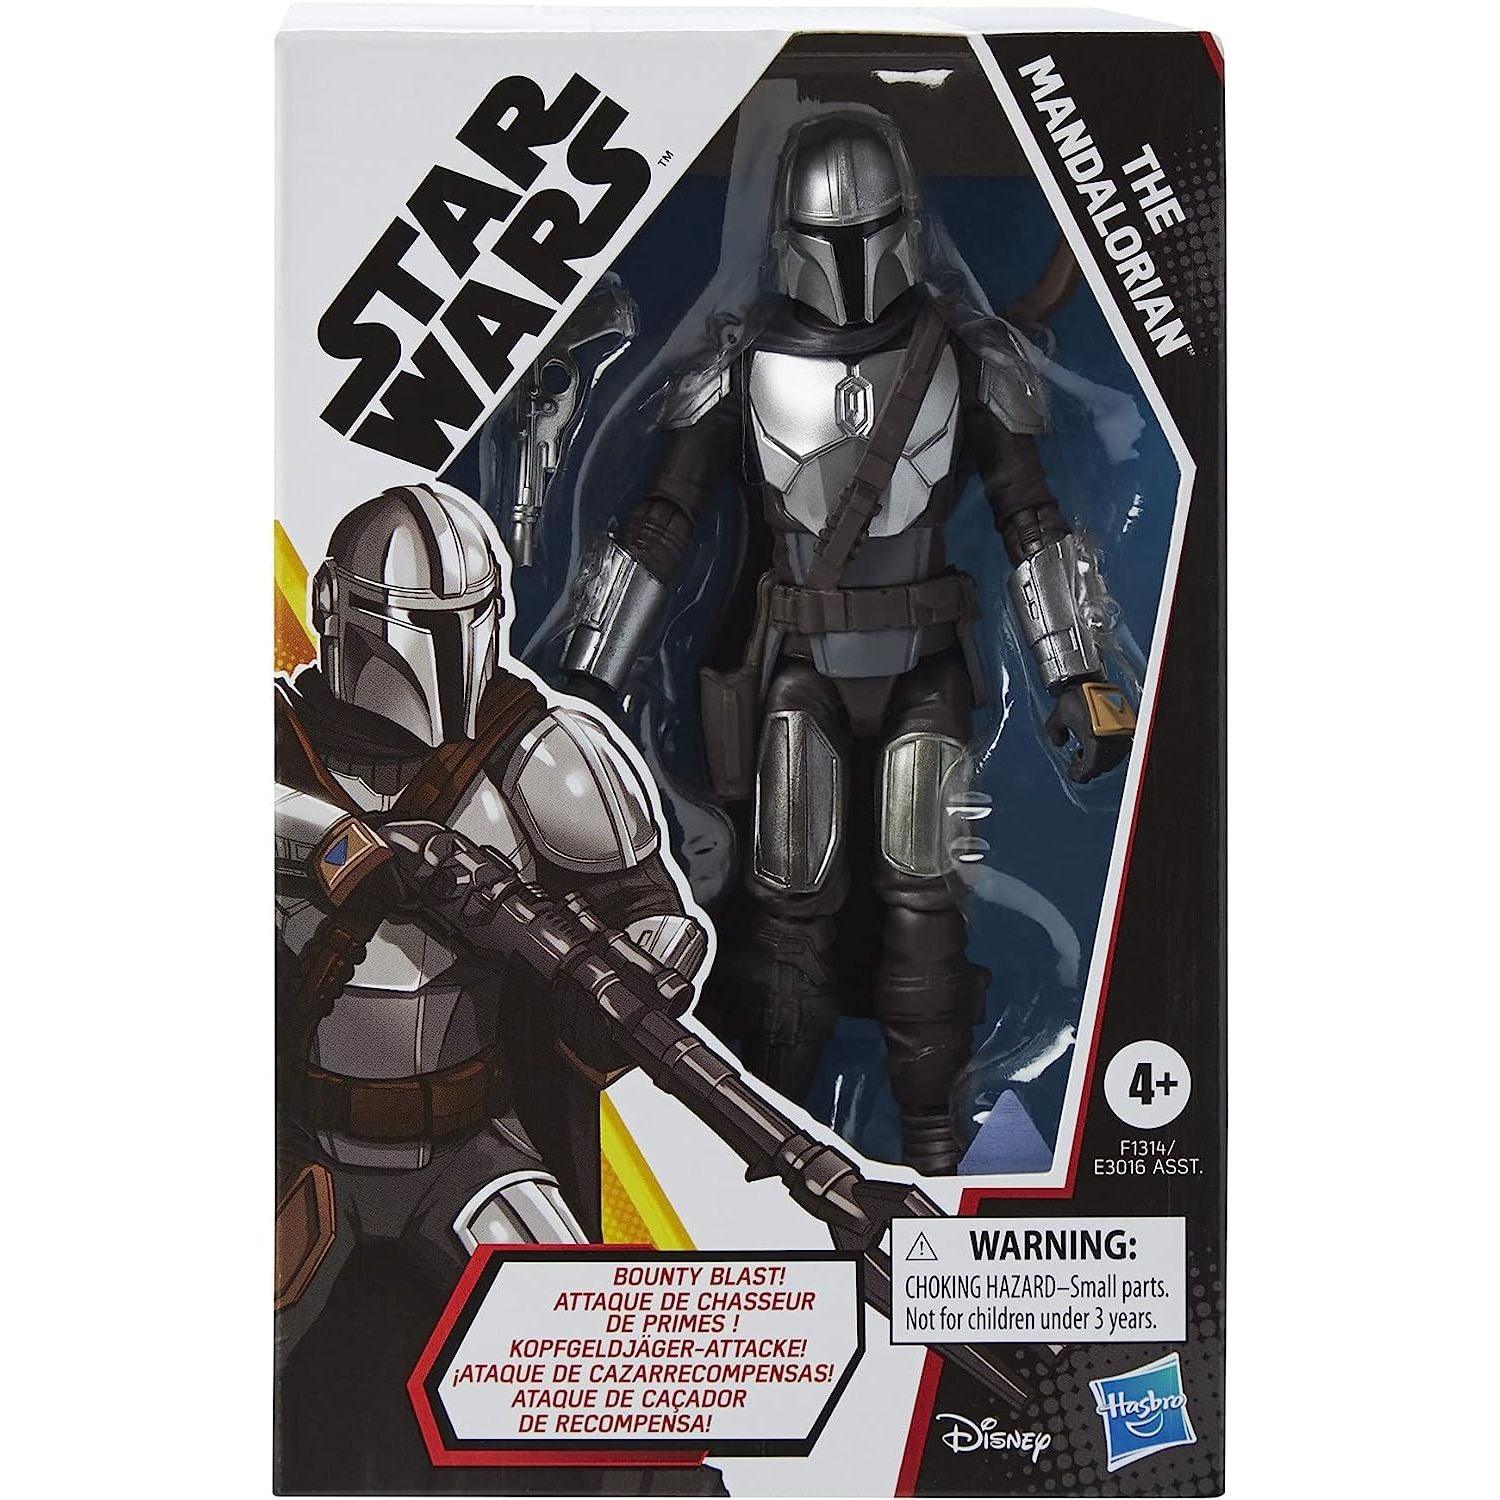 STAR WARS Galaxy of Adventures The Mandalorian 5-Inch-Scale Figure - BumbleToys - 5-7 Years, Action Figures, Boys, Figures, Mandalorian, Pre-Order, star wars